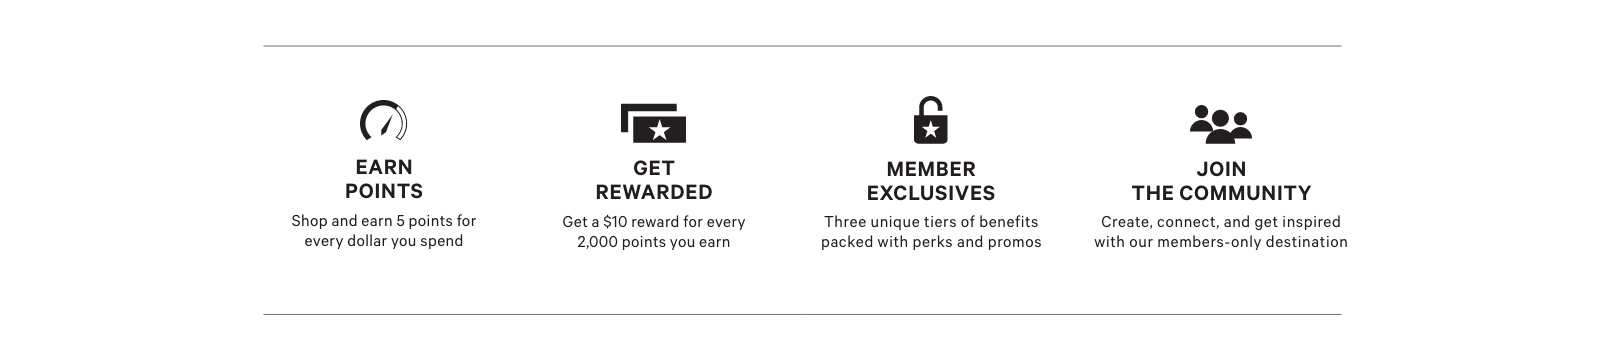 Earn Points: Shop and earn 5 points for every dollar you spend. Get Rewarded: Get a $10 reward for every 2,000 points you earn. Member Exclusives: Three unique tiers of benefits packed with perks and promos. Join The Community: Create, connect and get inspired with our new Members-only destination.